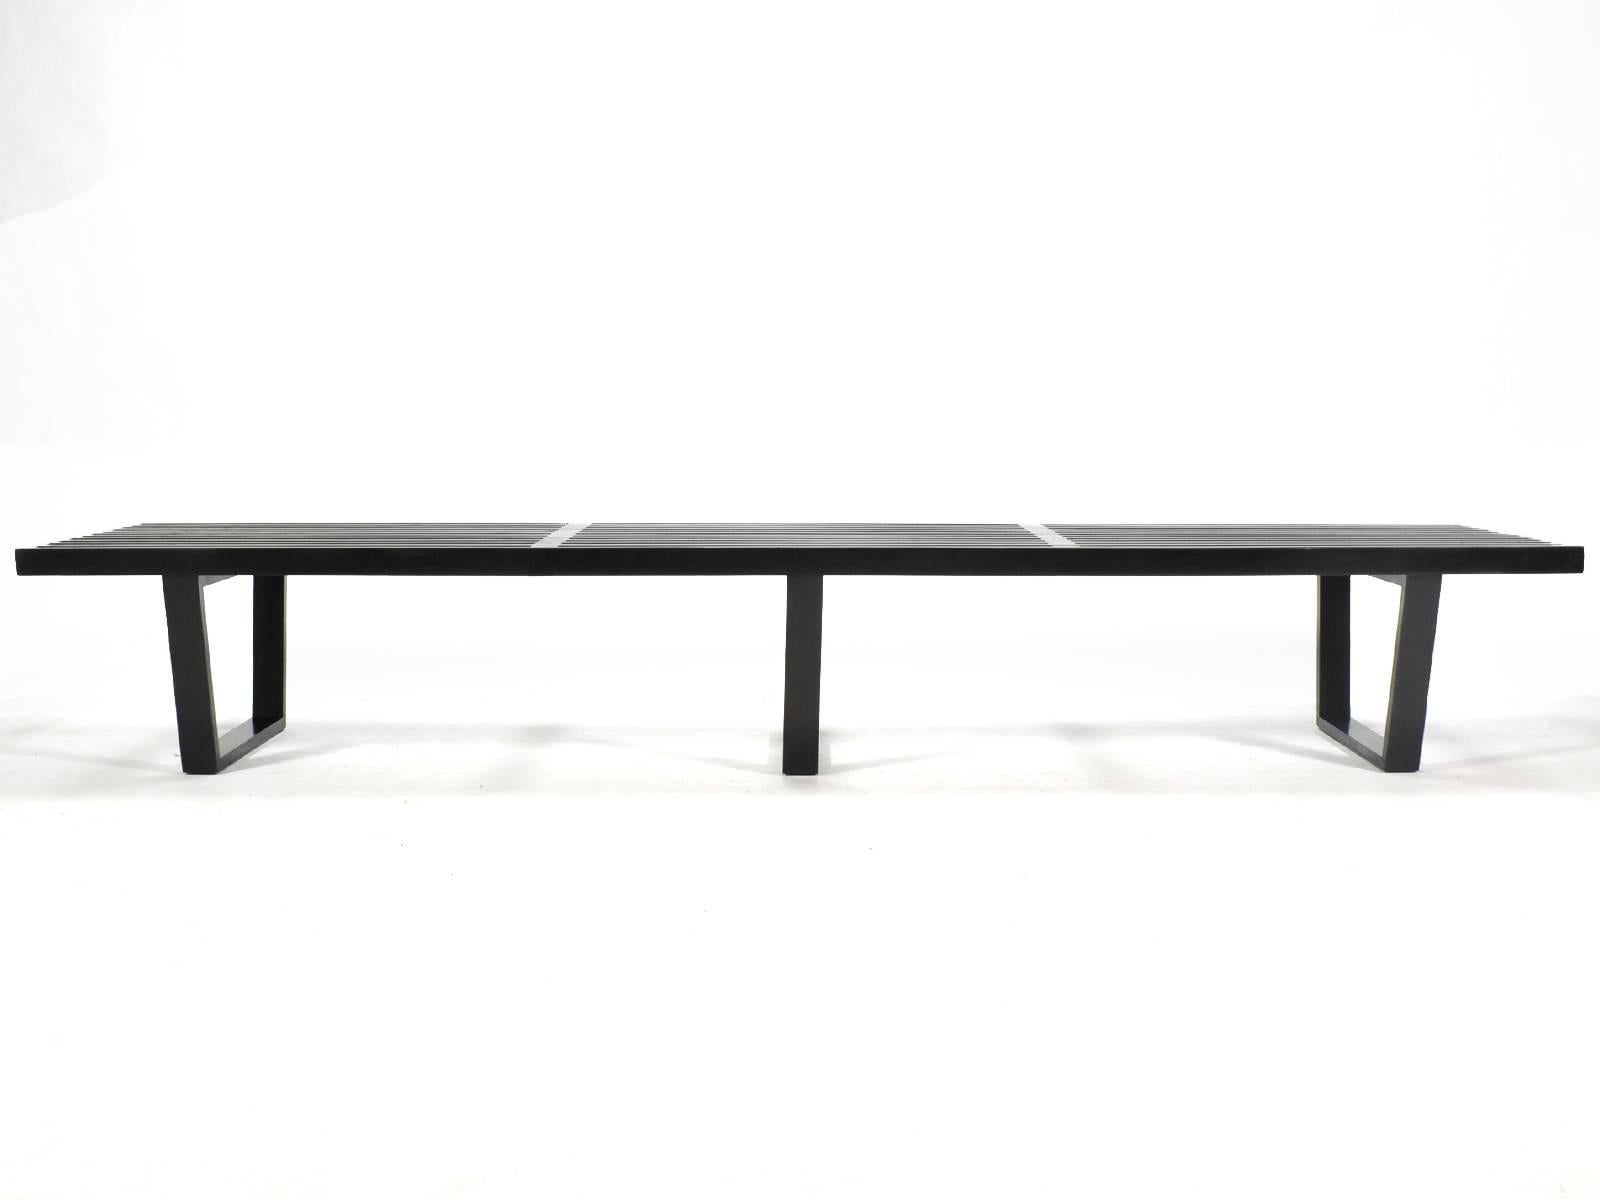 Established as an icon of Mid-Century design, Nelson's slat platform bench has been proven a highly functional and beautiful form. George Nelson originally created it as a versatile piece to serve as a table, a bench or a platform for case goods. In